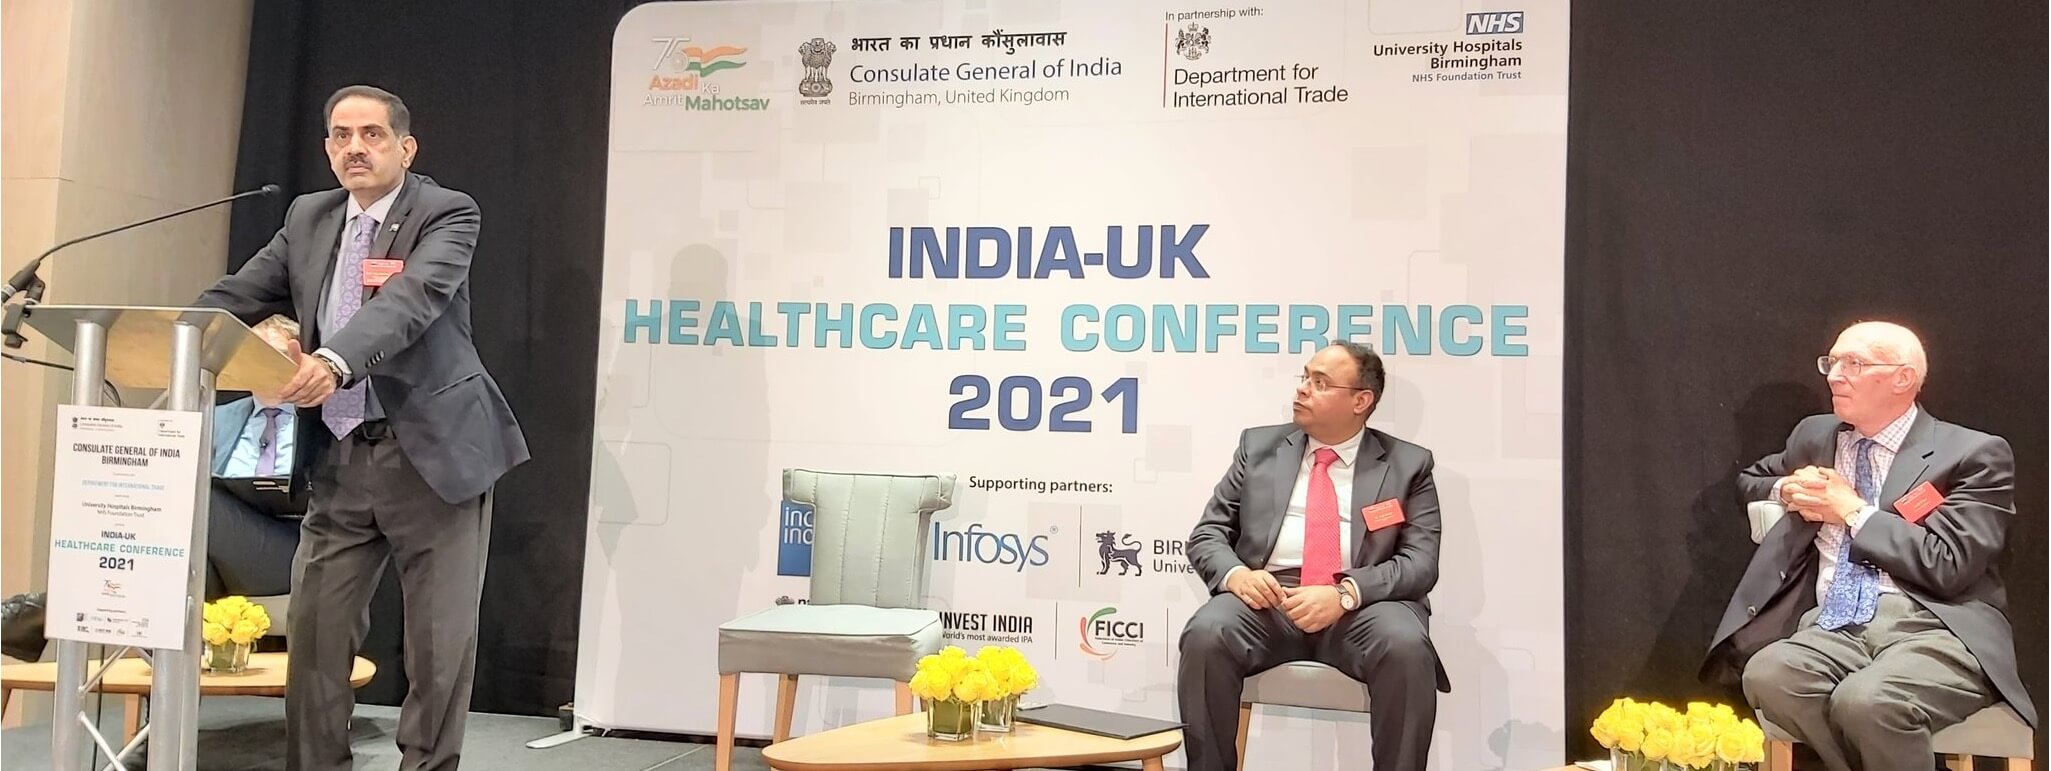 INDO-UK Healthcare Conference 2021